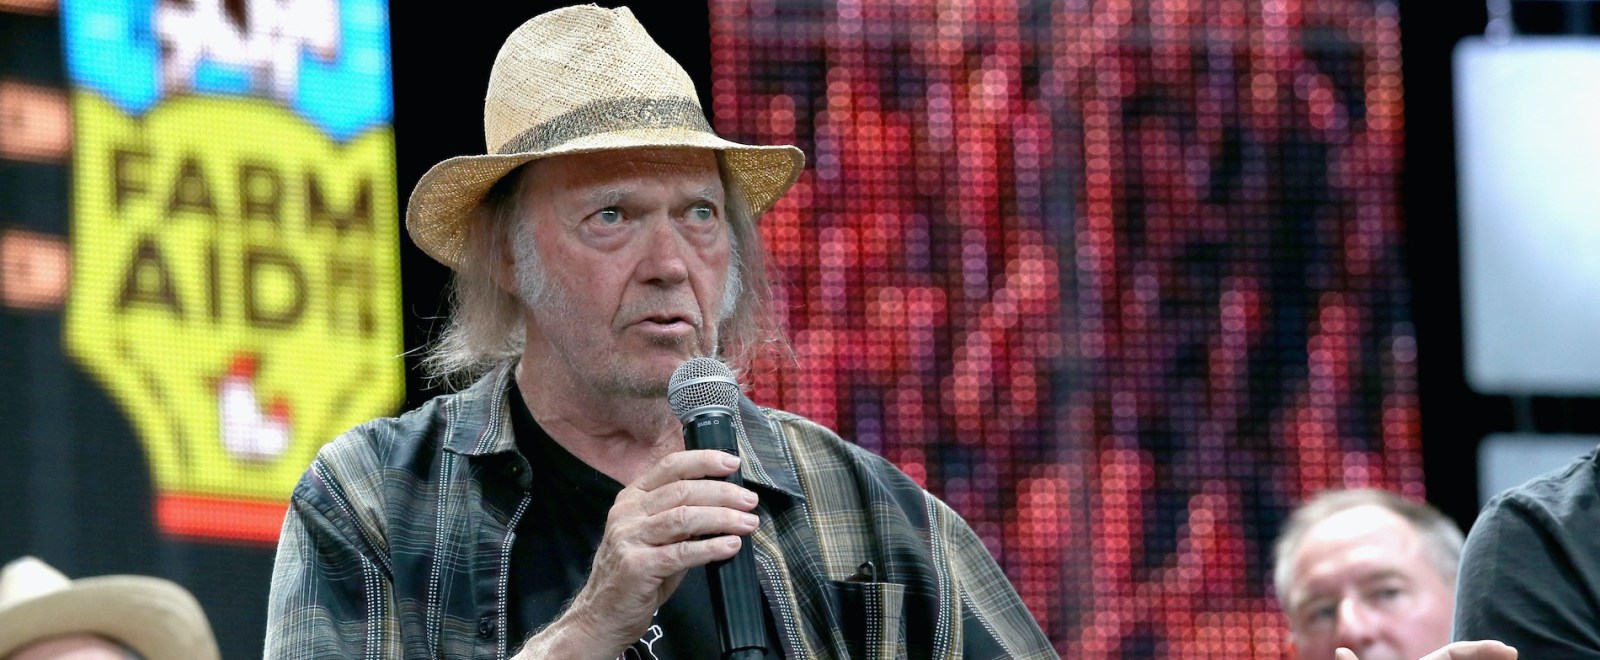 neil-young-getty-full.jpg